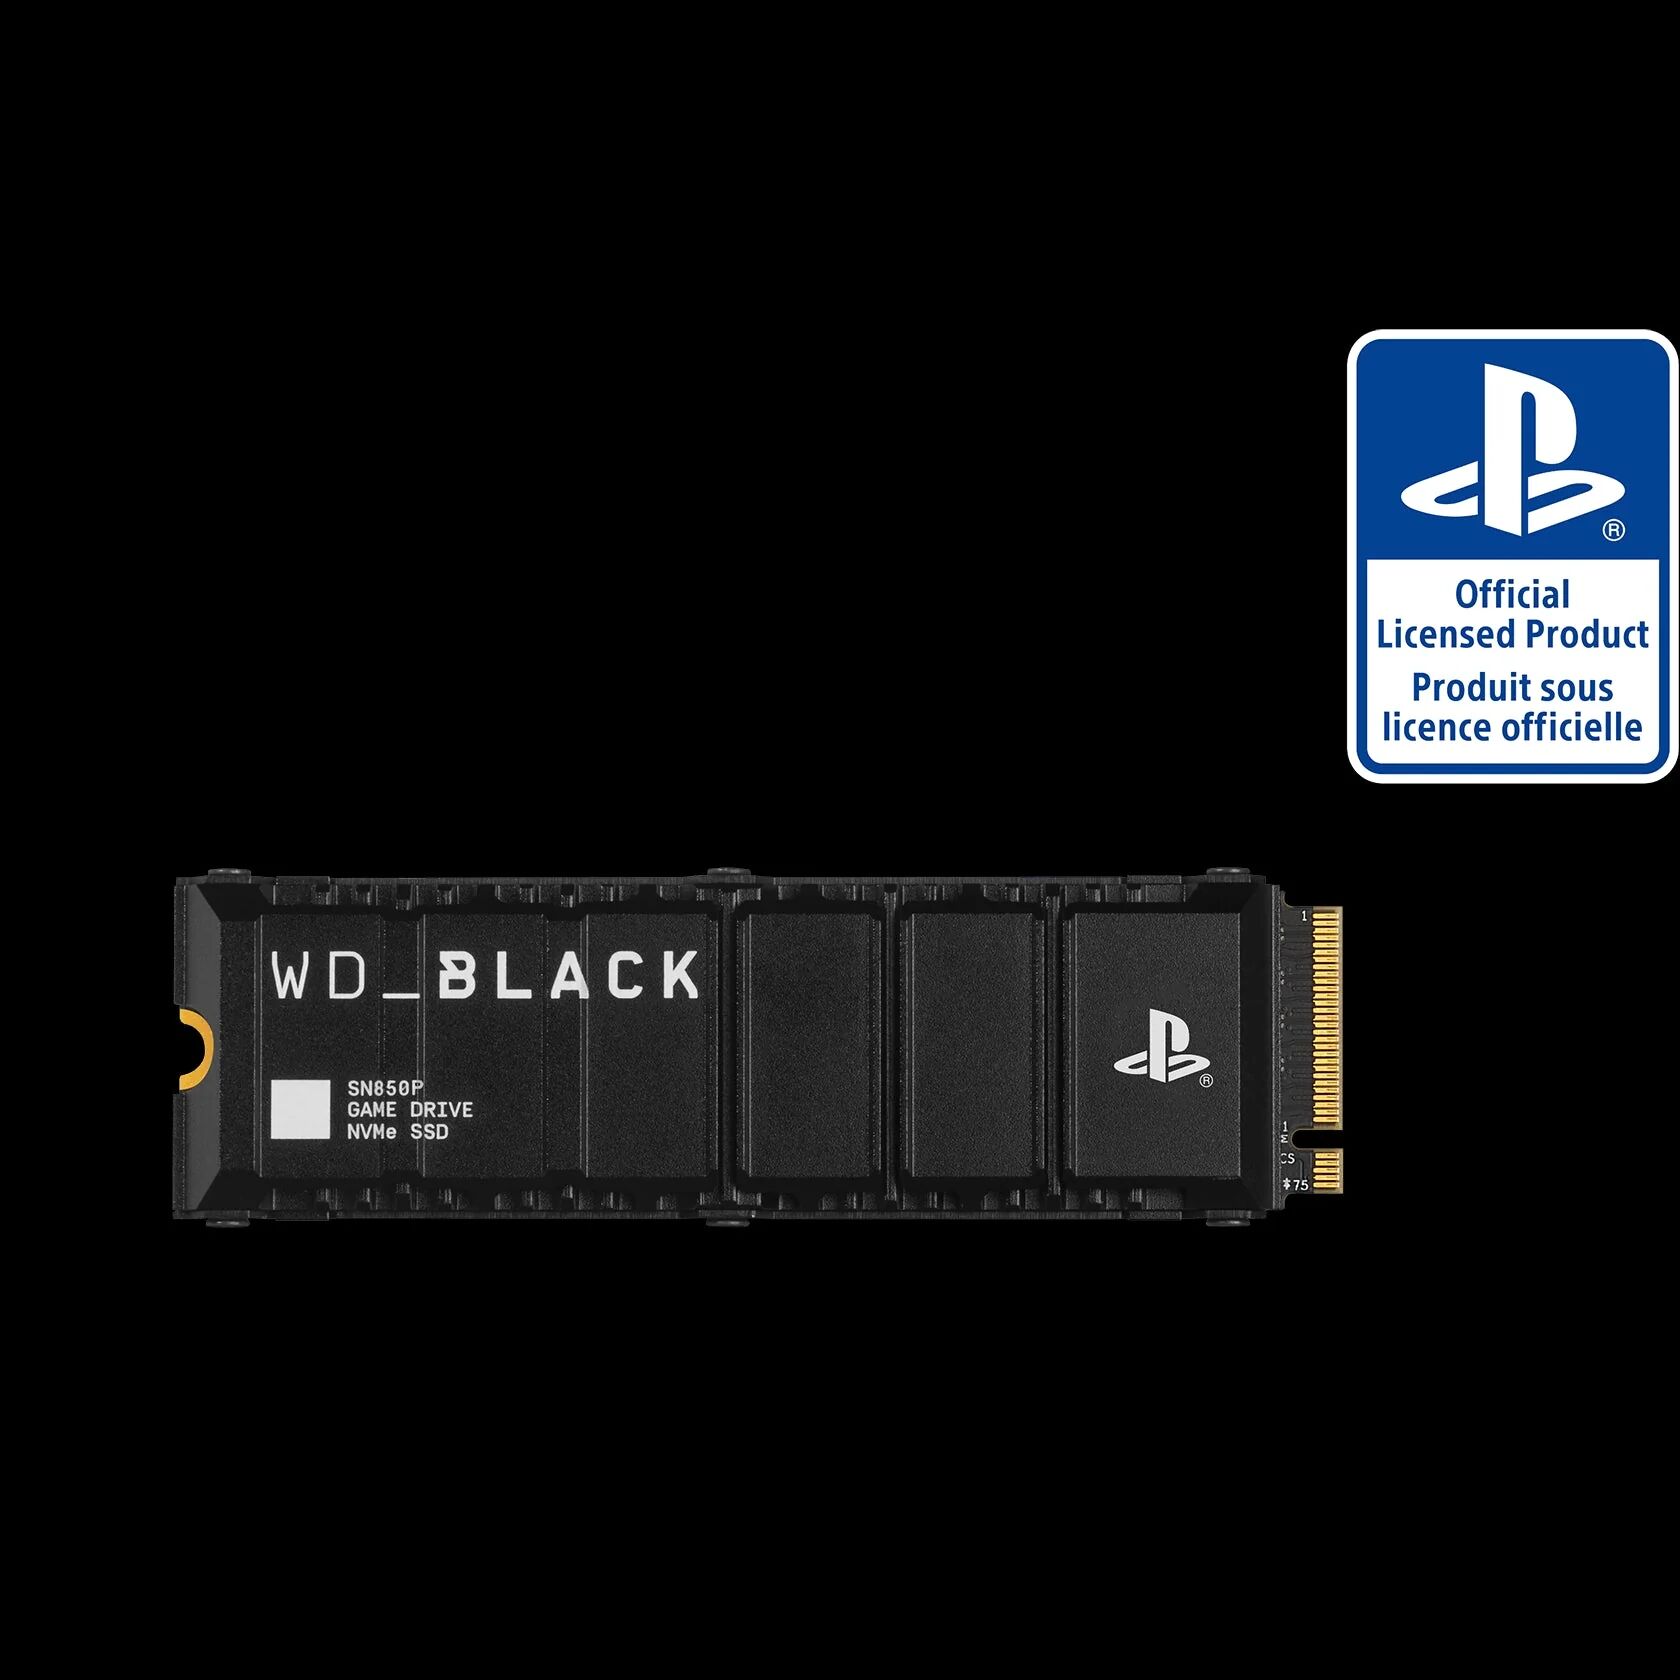 SanDisk Wd black sn850p nvme ssd for ps5 1tb